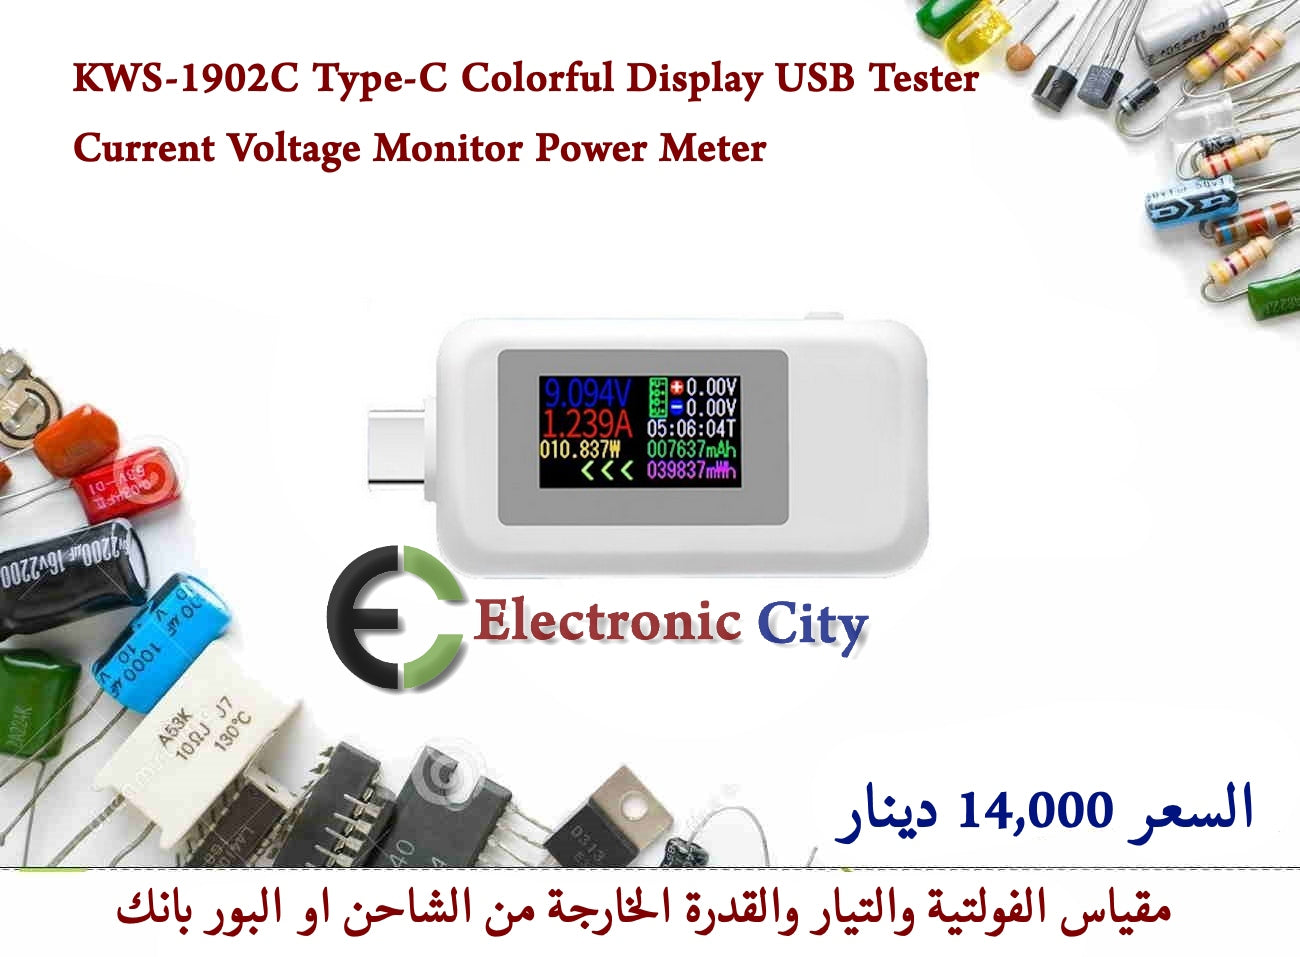 KWS-1902C Type-C Colorful Display USB Tester Current Voltage Monitor Power Meter   X-JM0425A